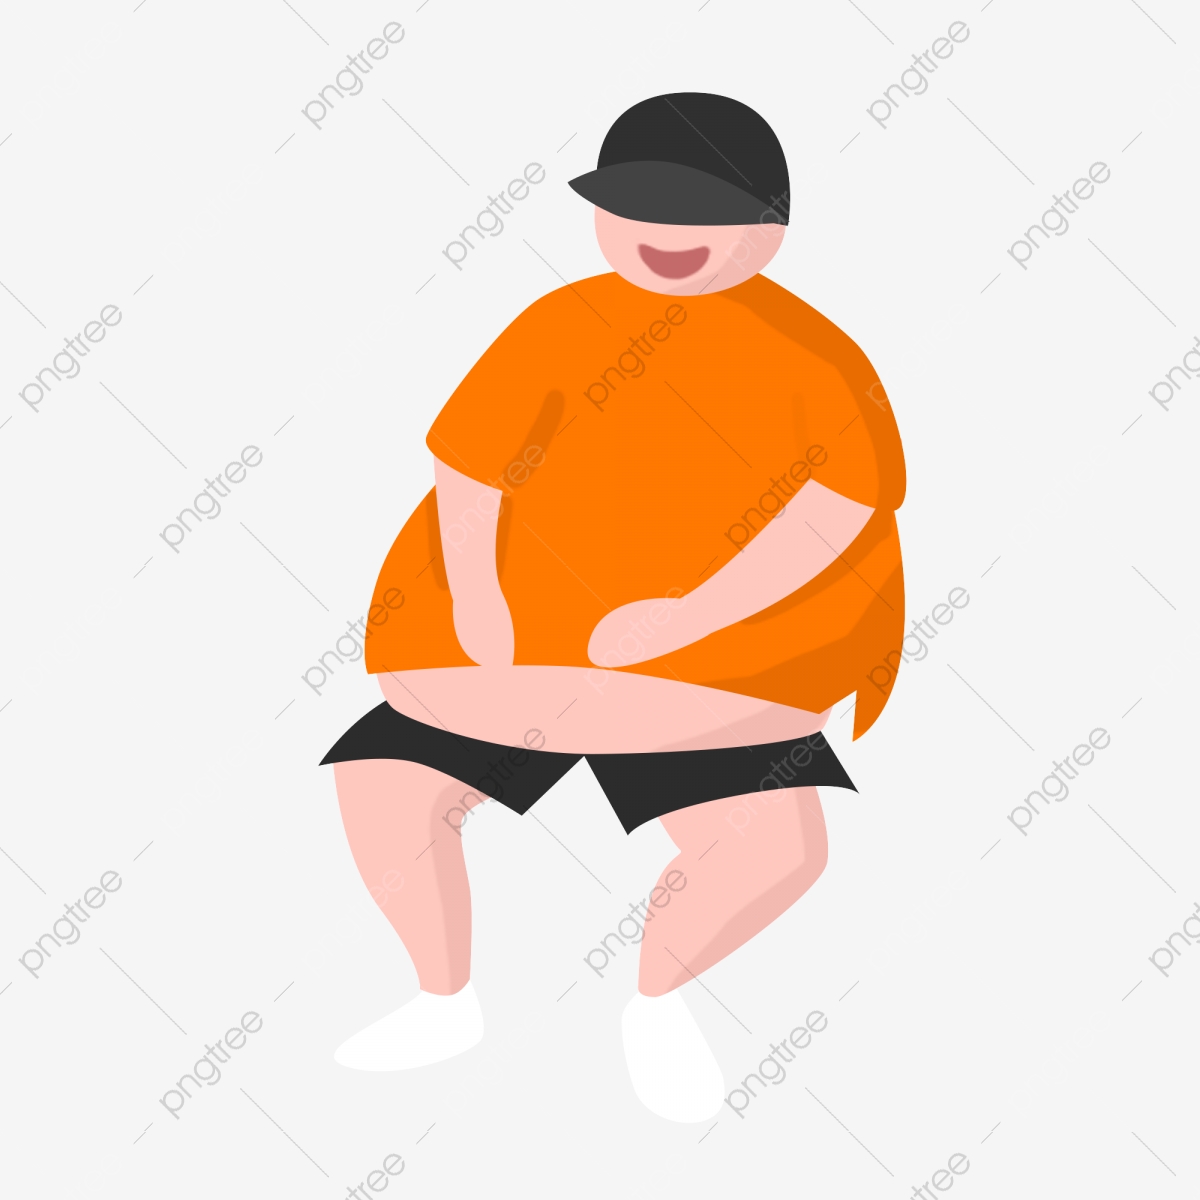 fat clipart simple